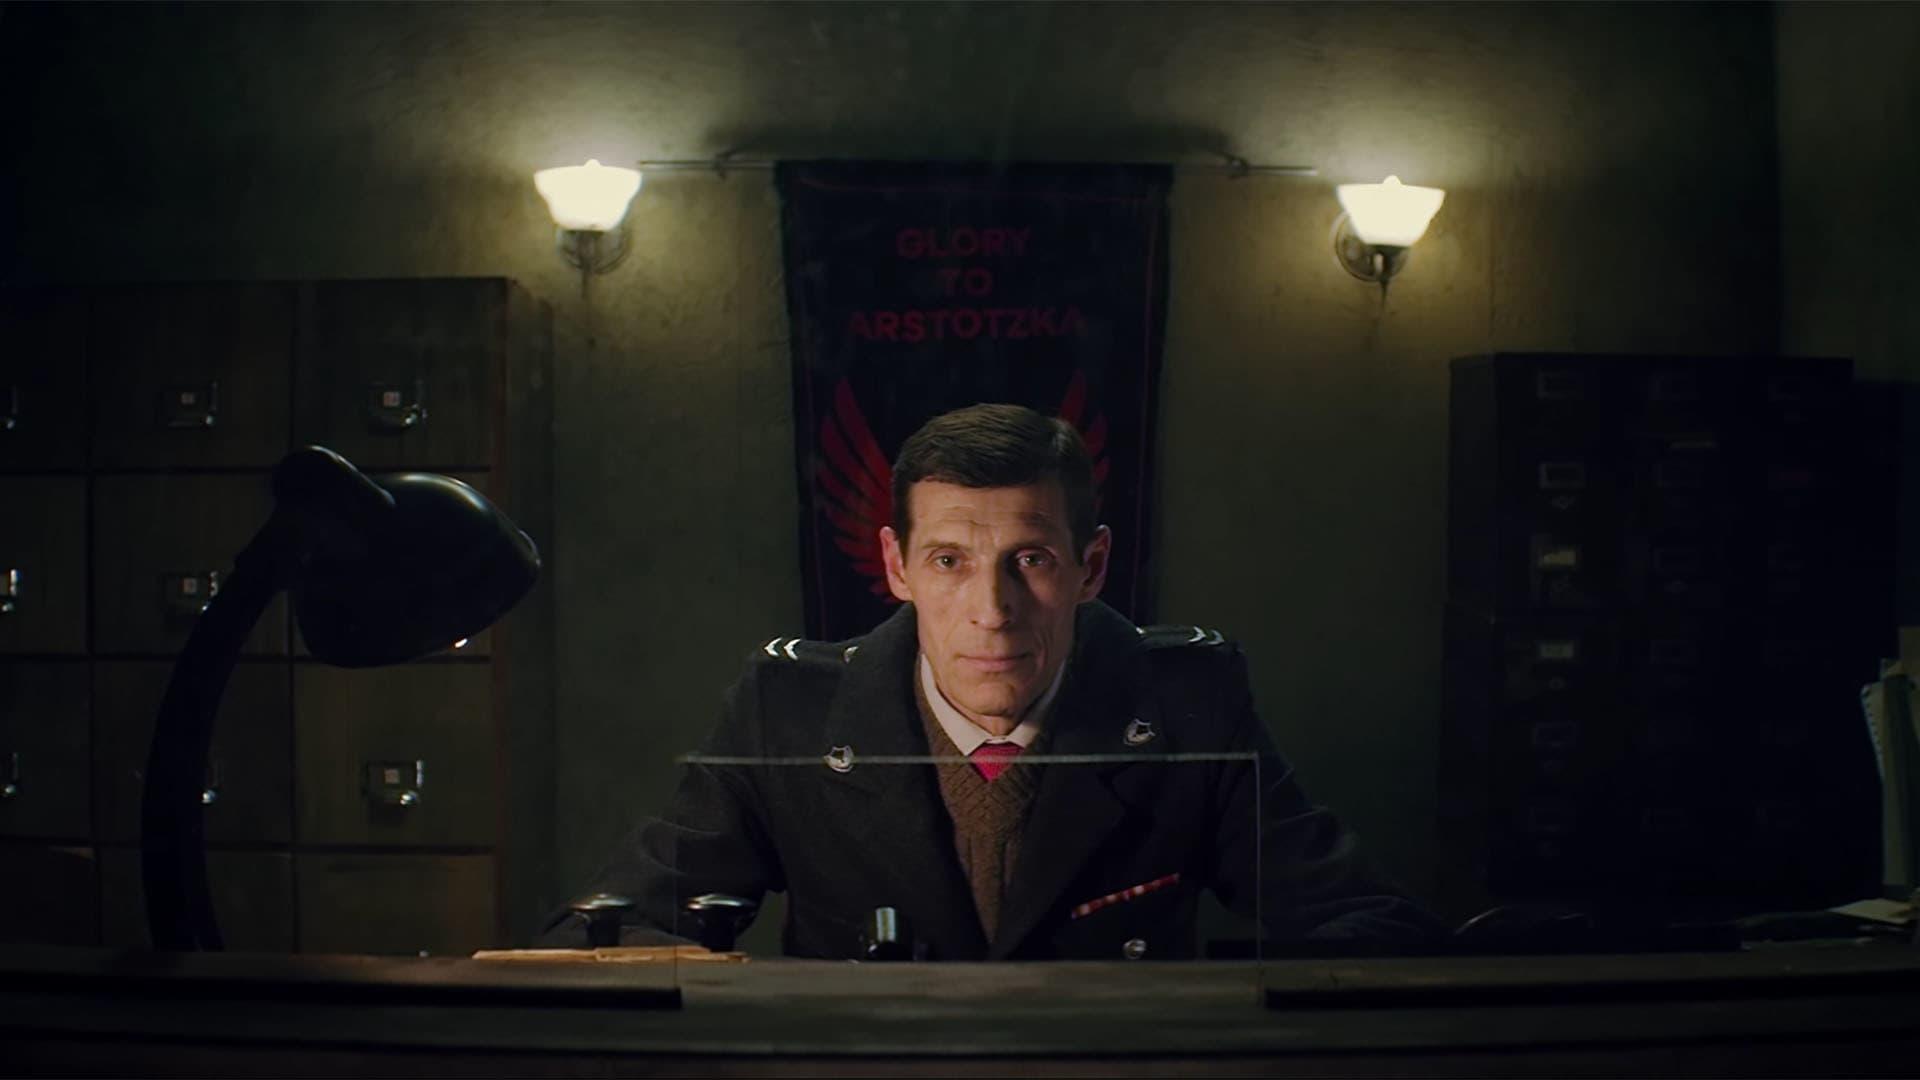 Papers, Please: The Short Film backdrop